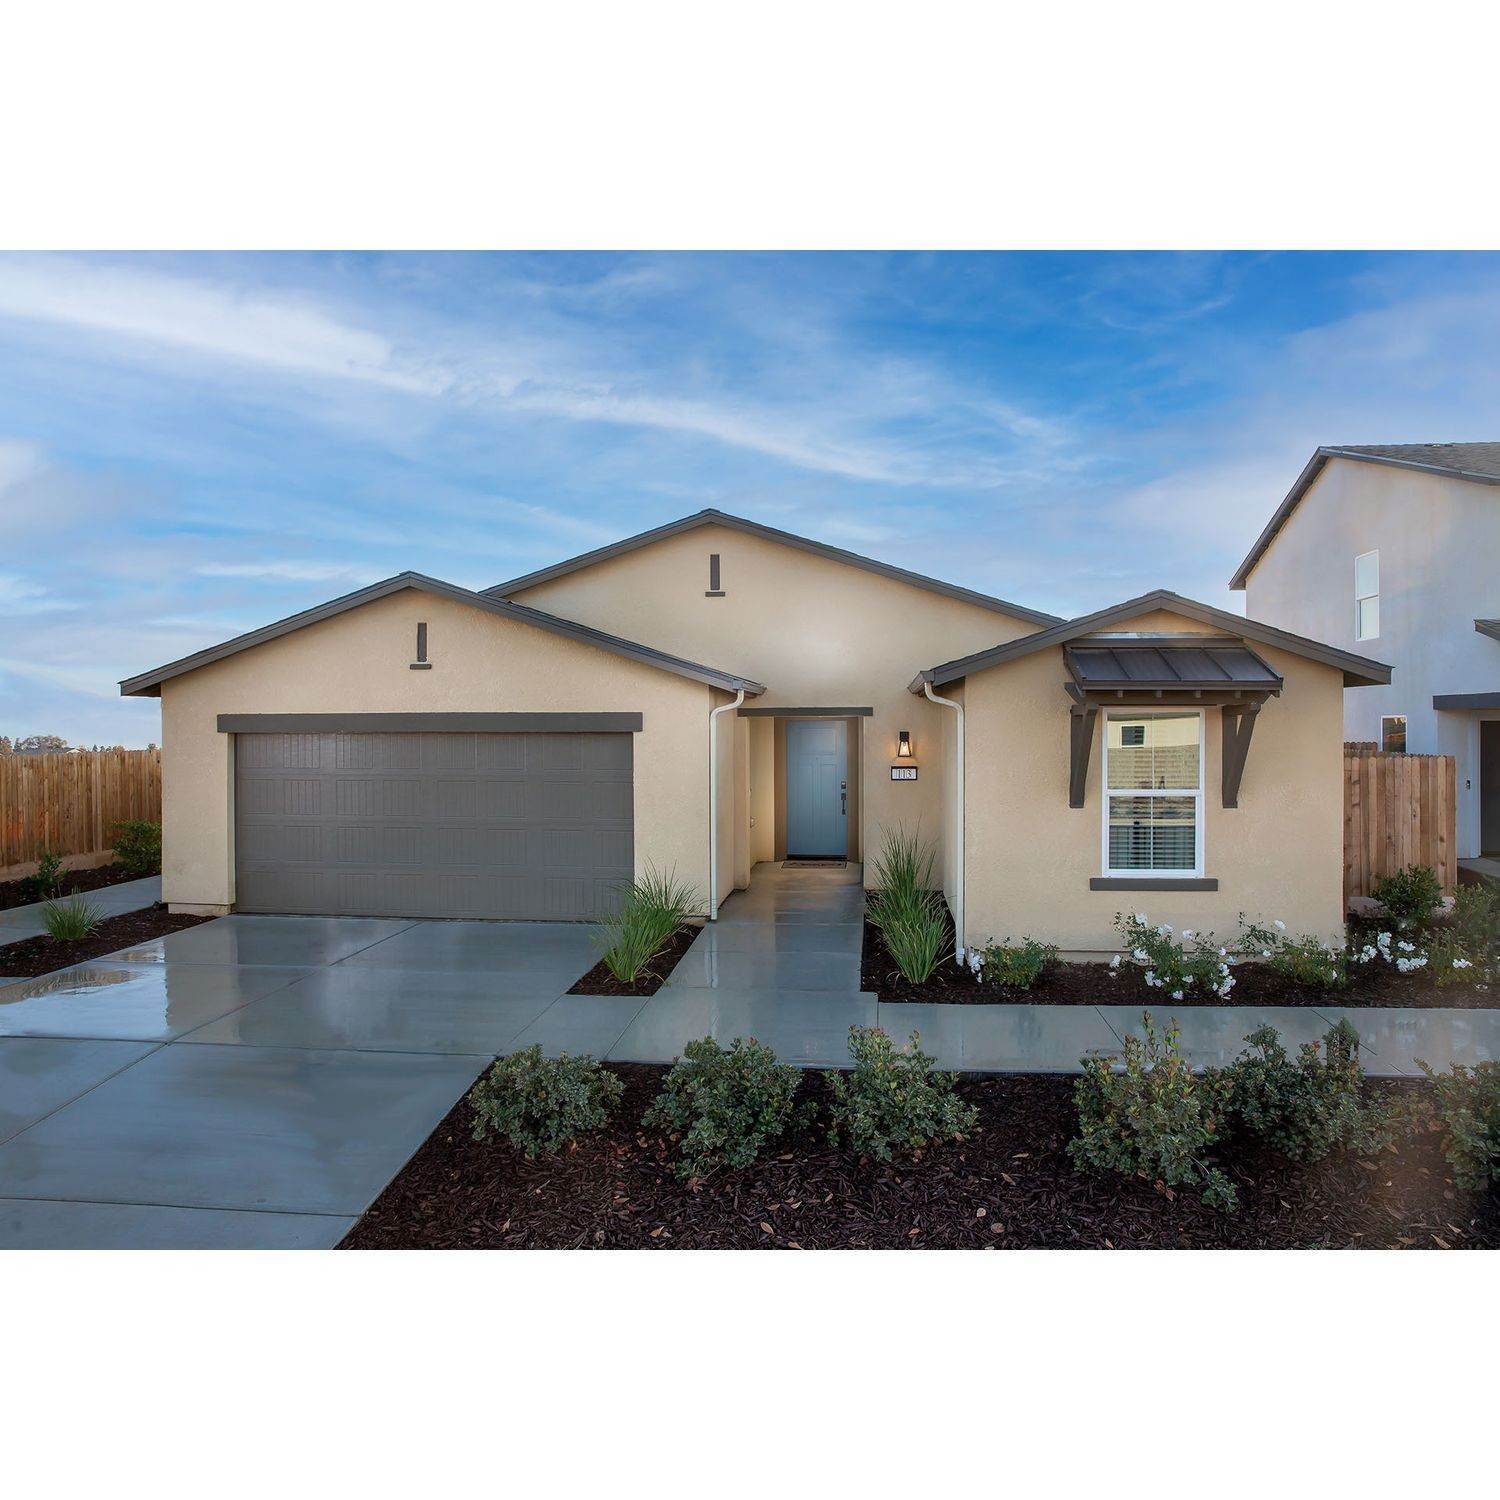 Single Family for Active at Oxford 4522 Iris Court MERCED, CALIFORNIA 95348 UNITED STATES